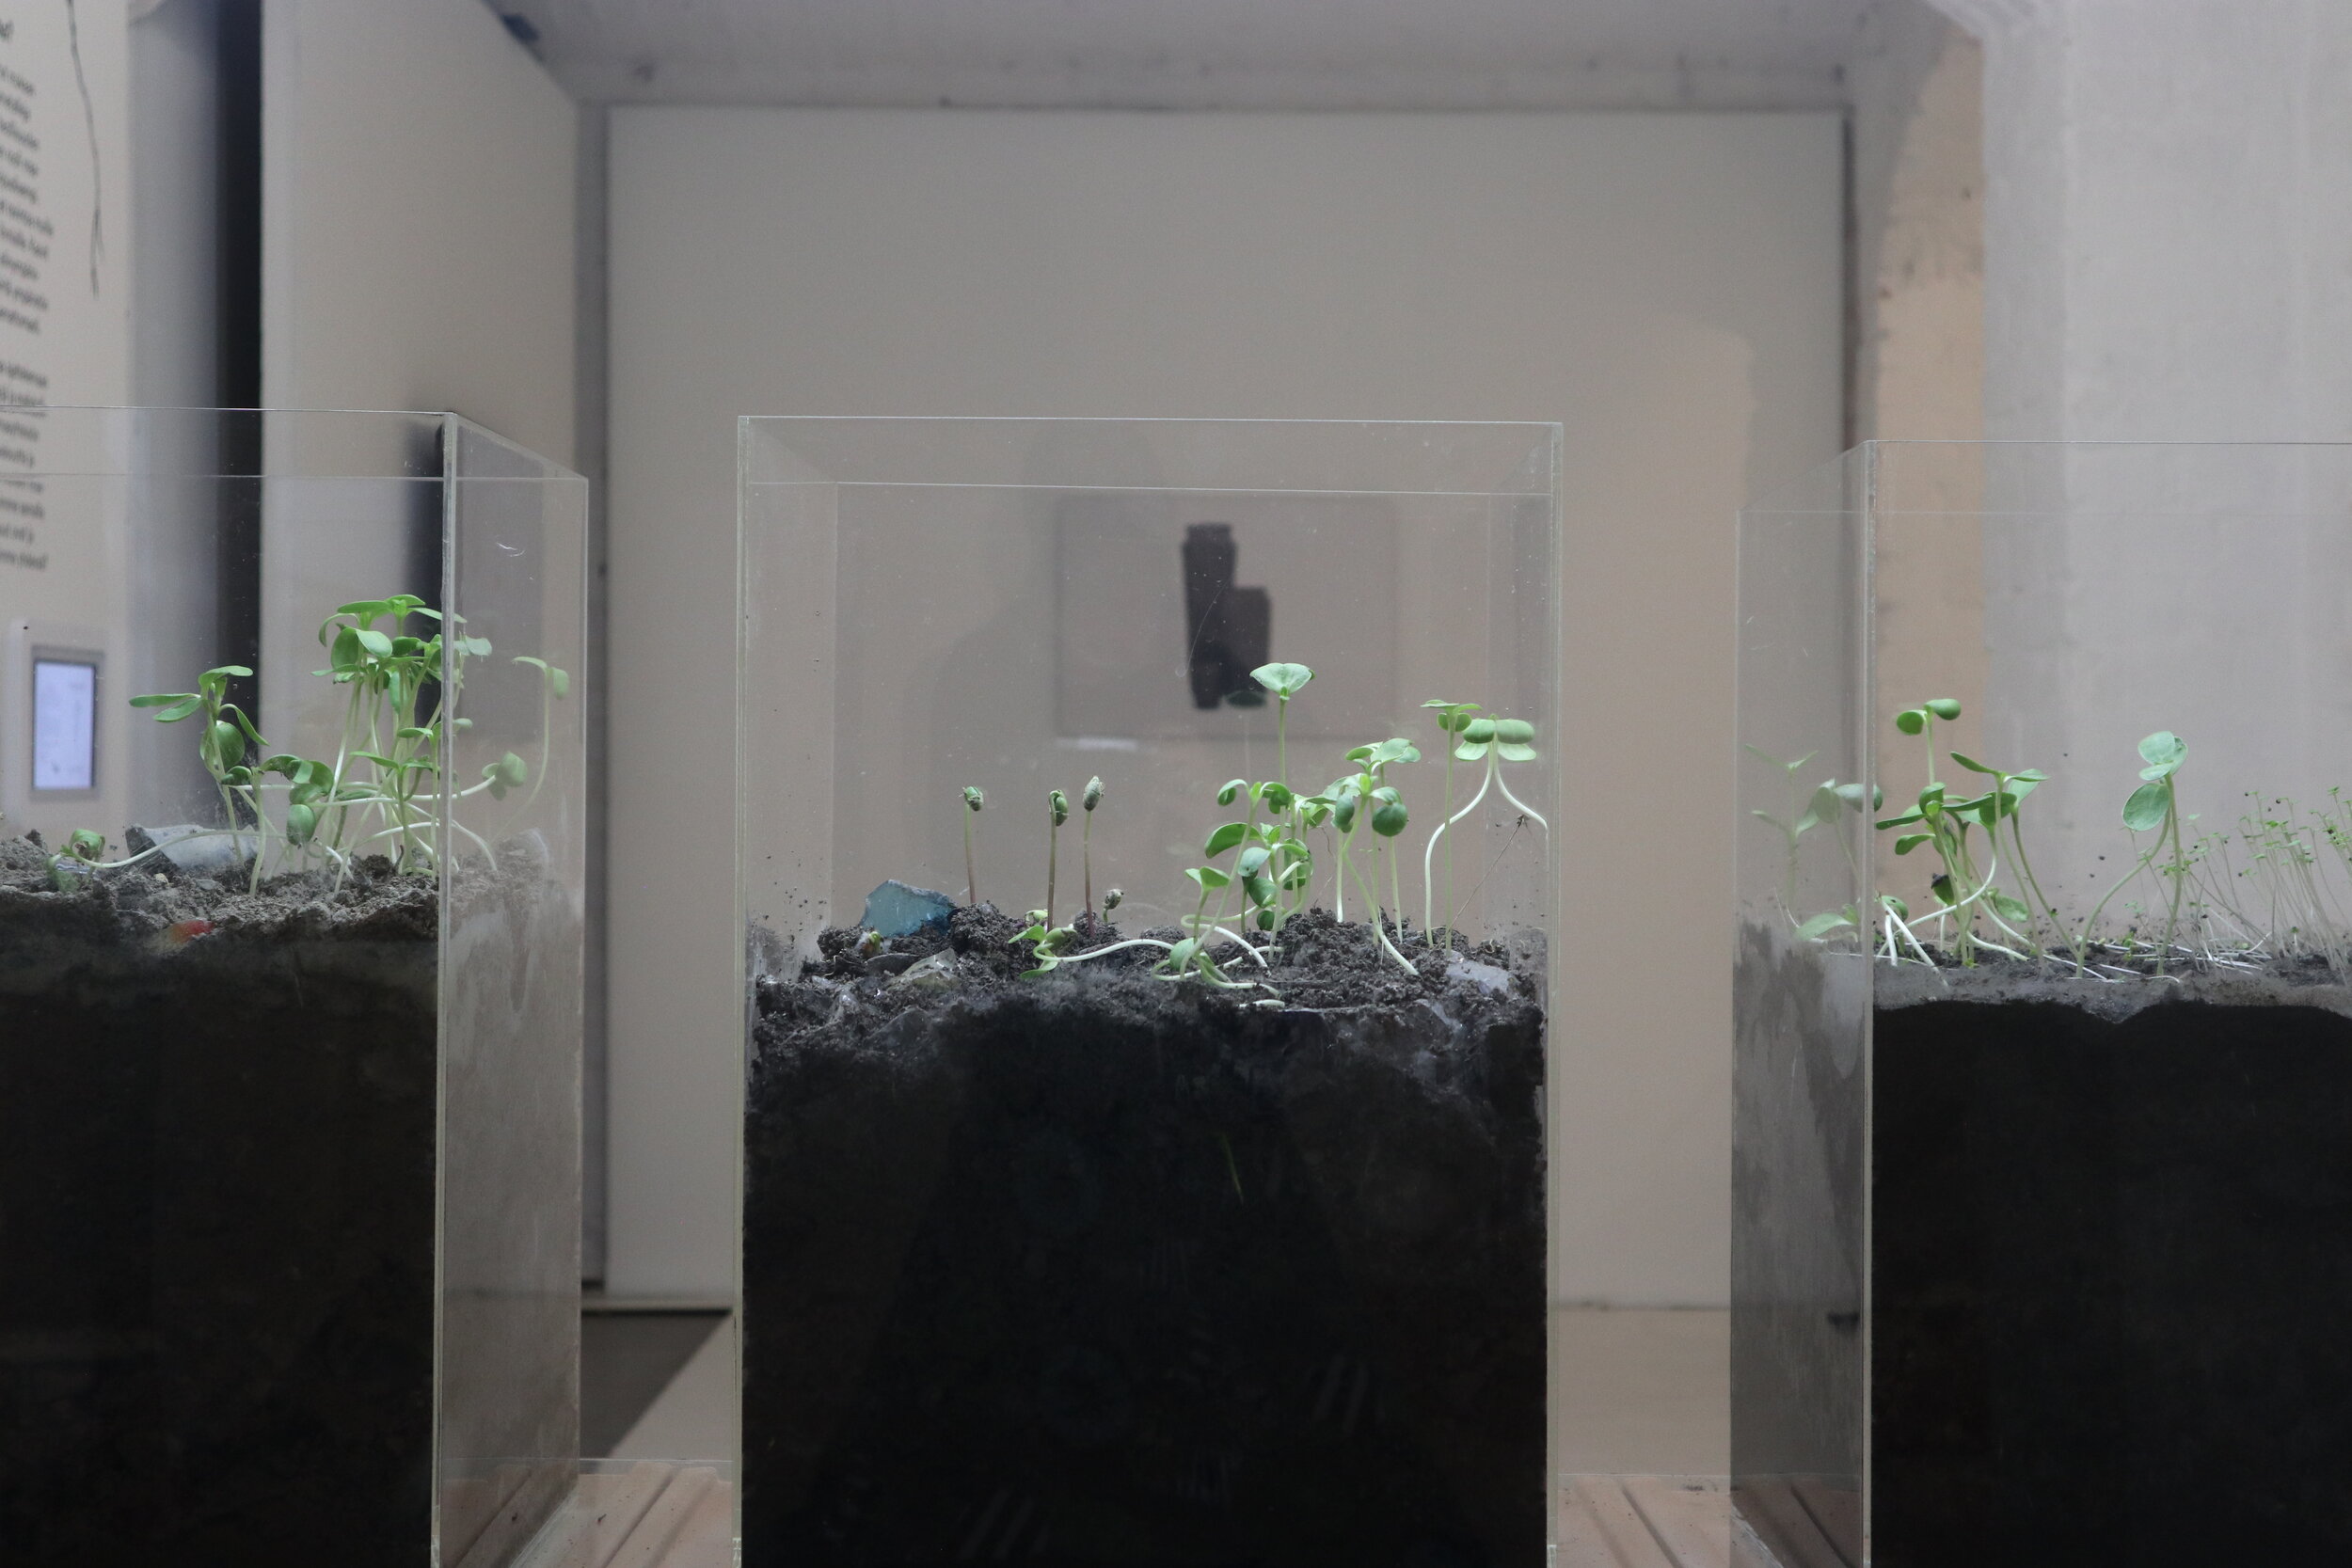   The process of germination and growth of the plants can be followed in the Soil Matters exhibition space. Photo: Tzuyu Chen  